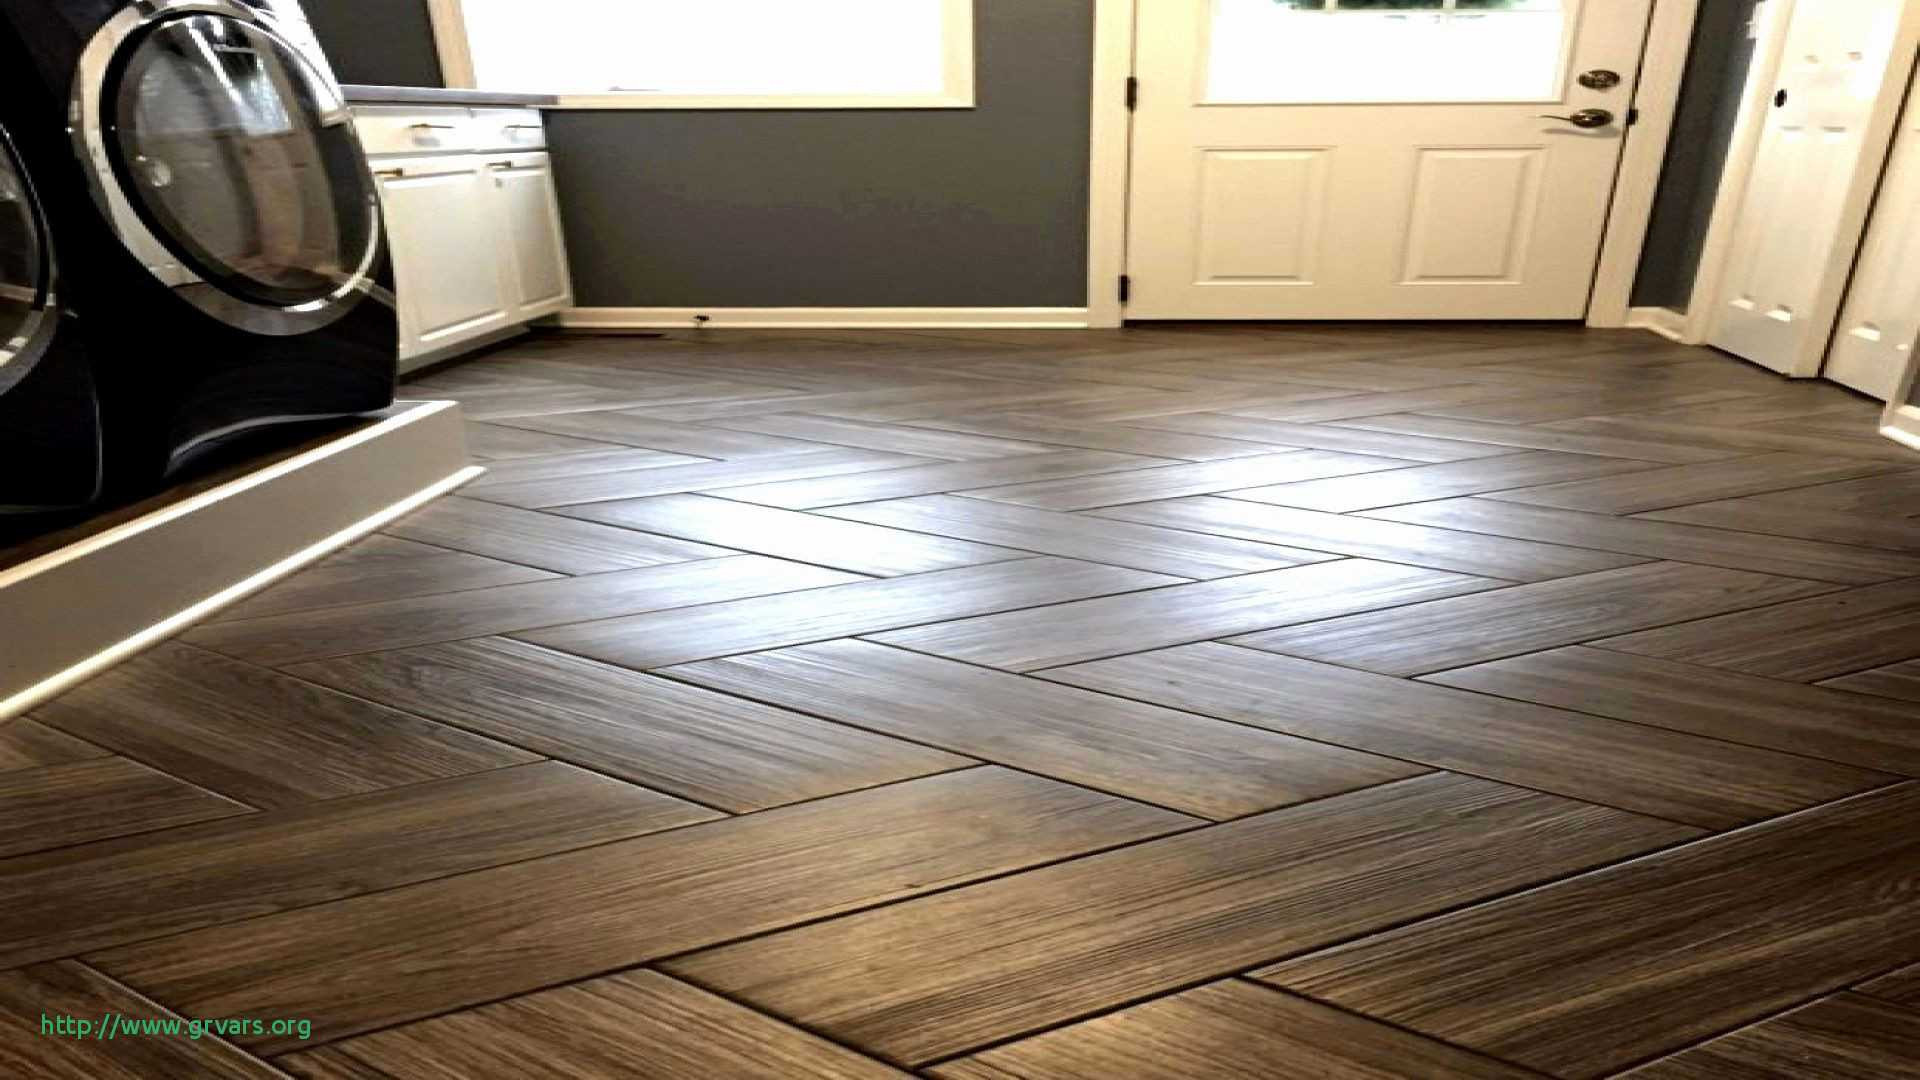 average cost to finish hardwood floors of 24 inspirant how much are wood floors ideas blog inside how much are wood floors luxe laminated wooden flooring prices guide to solid hardwood floors